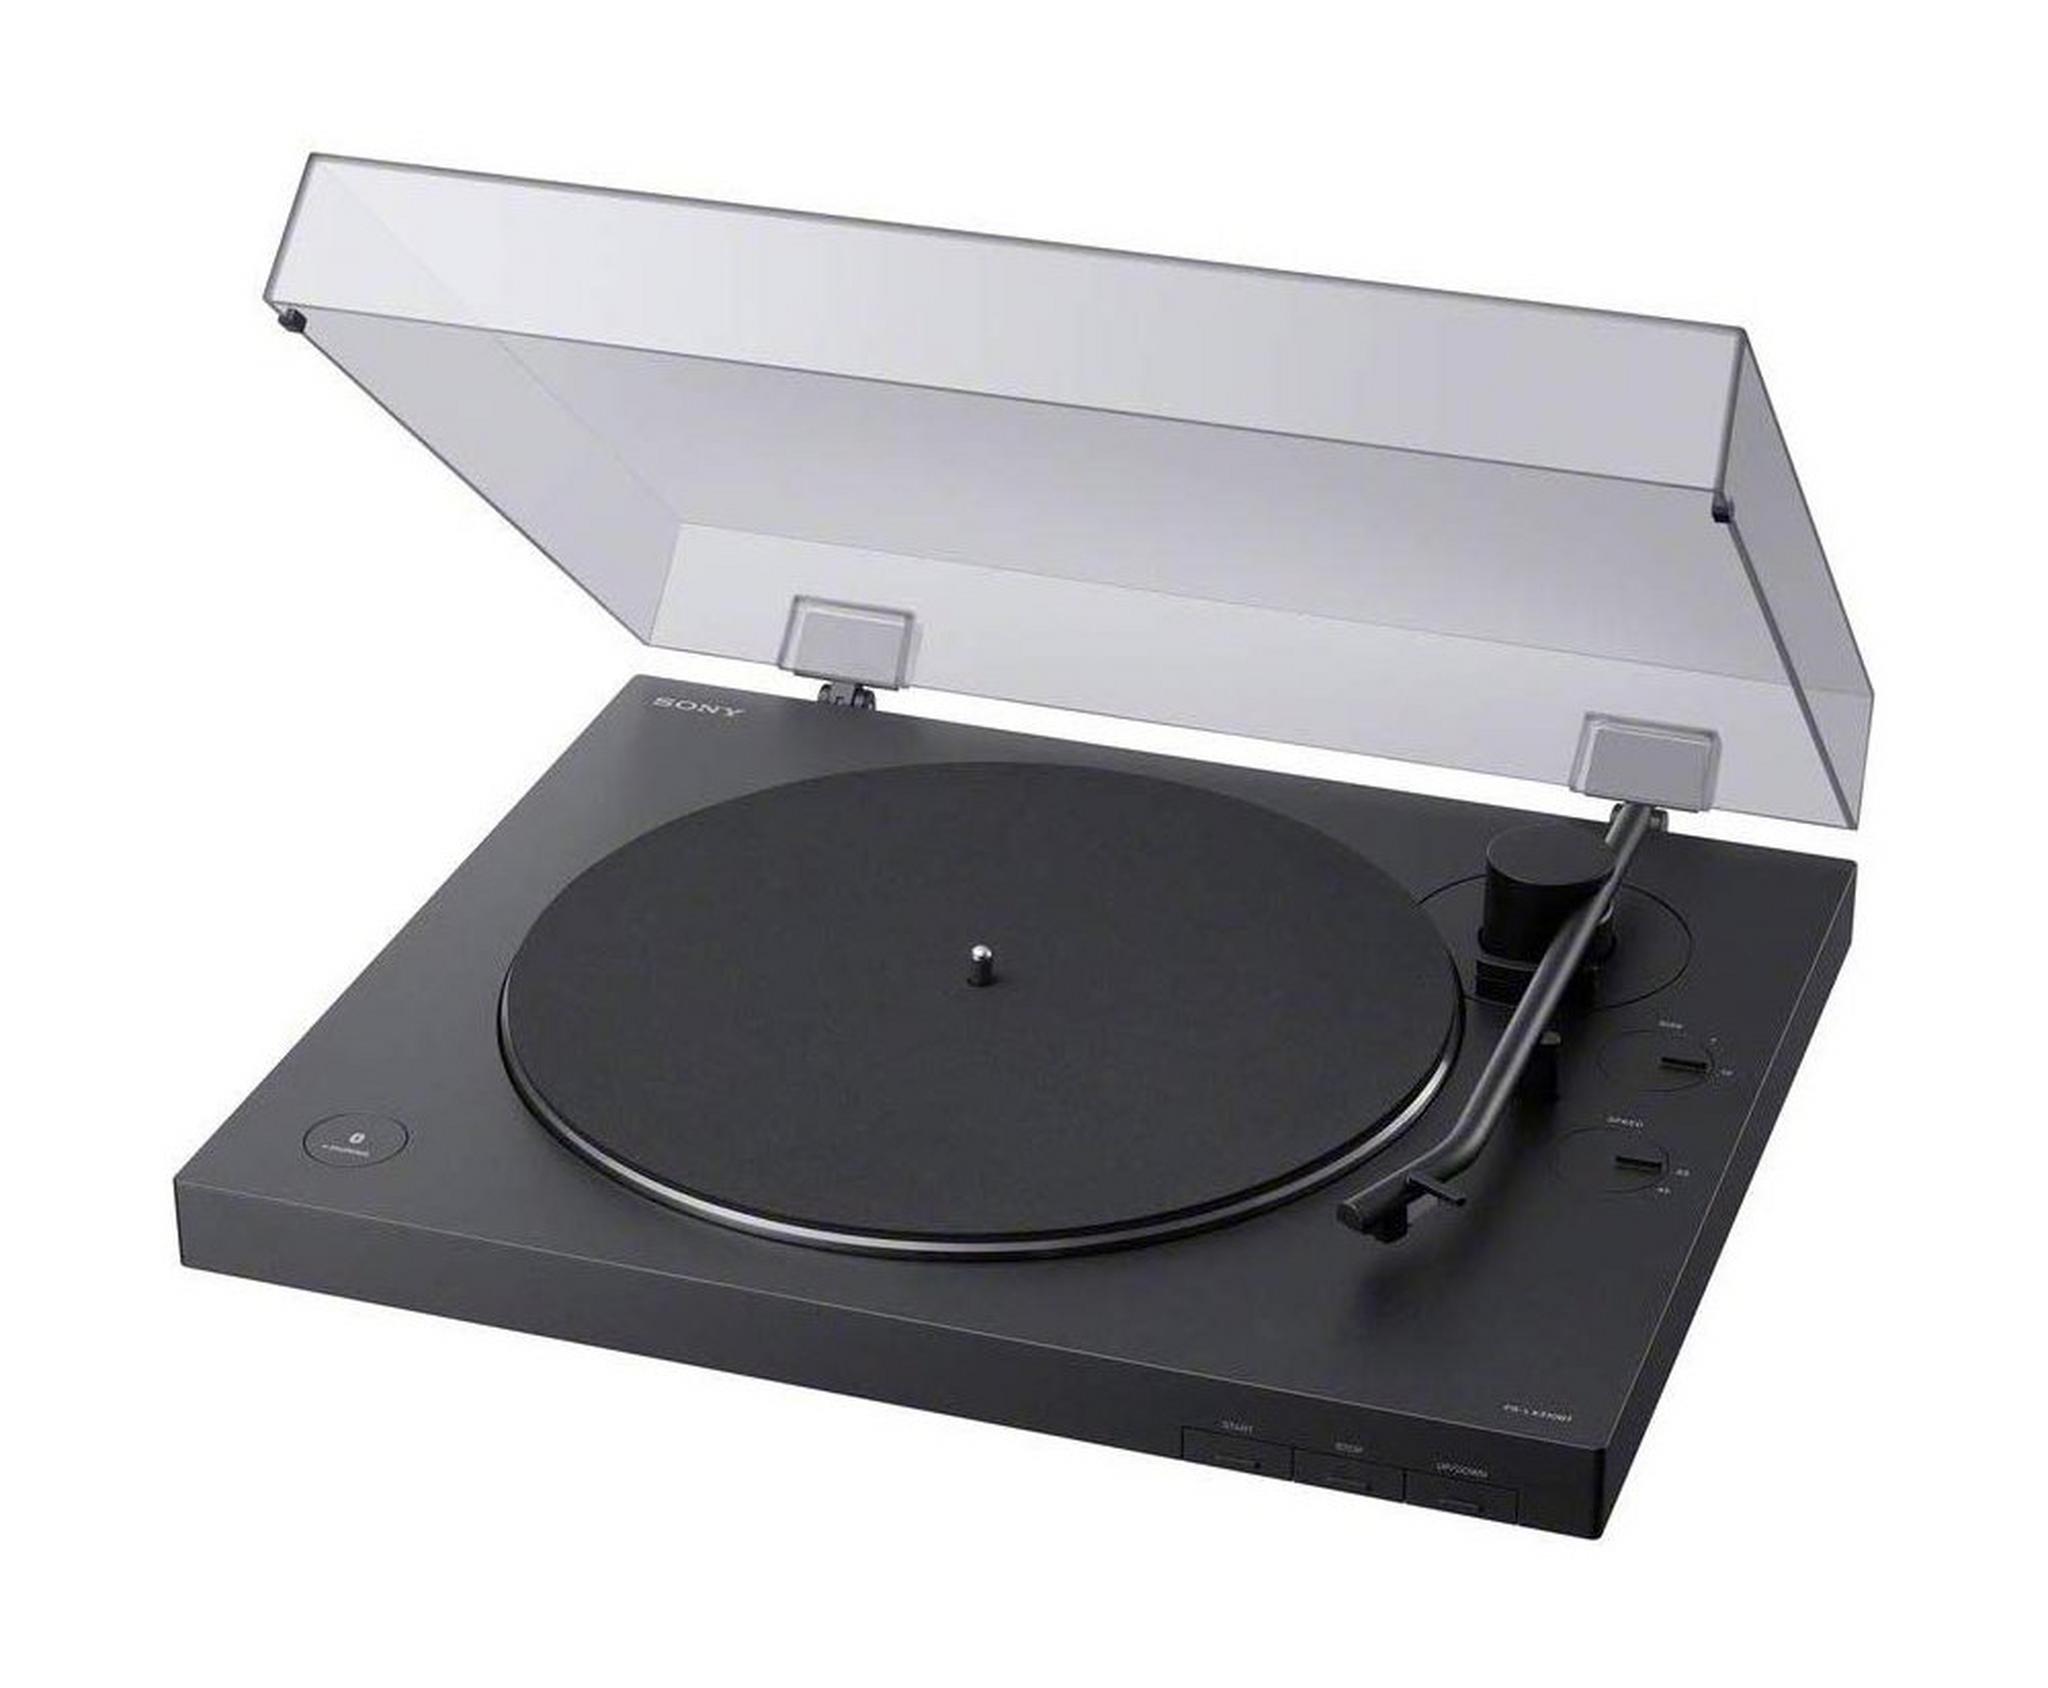 Sony PS-LX310BT Fully Automatic Wireless Bluetooth Belt Drive Turntable